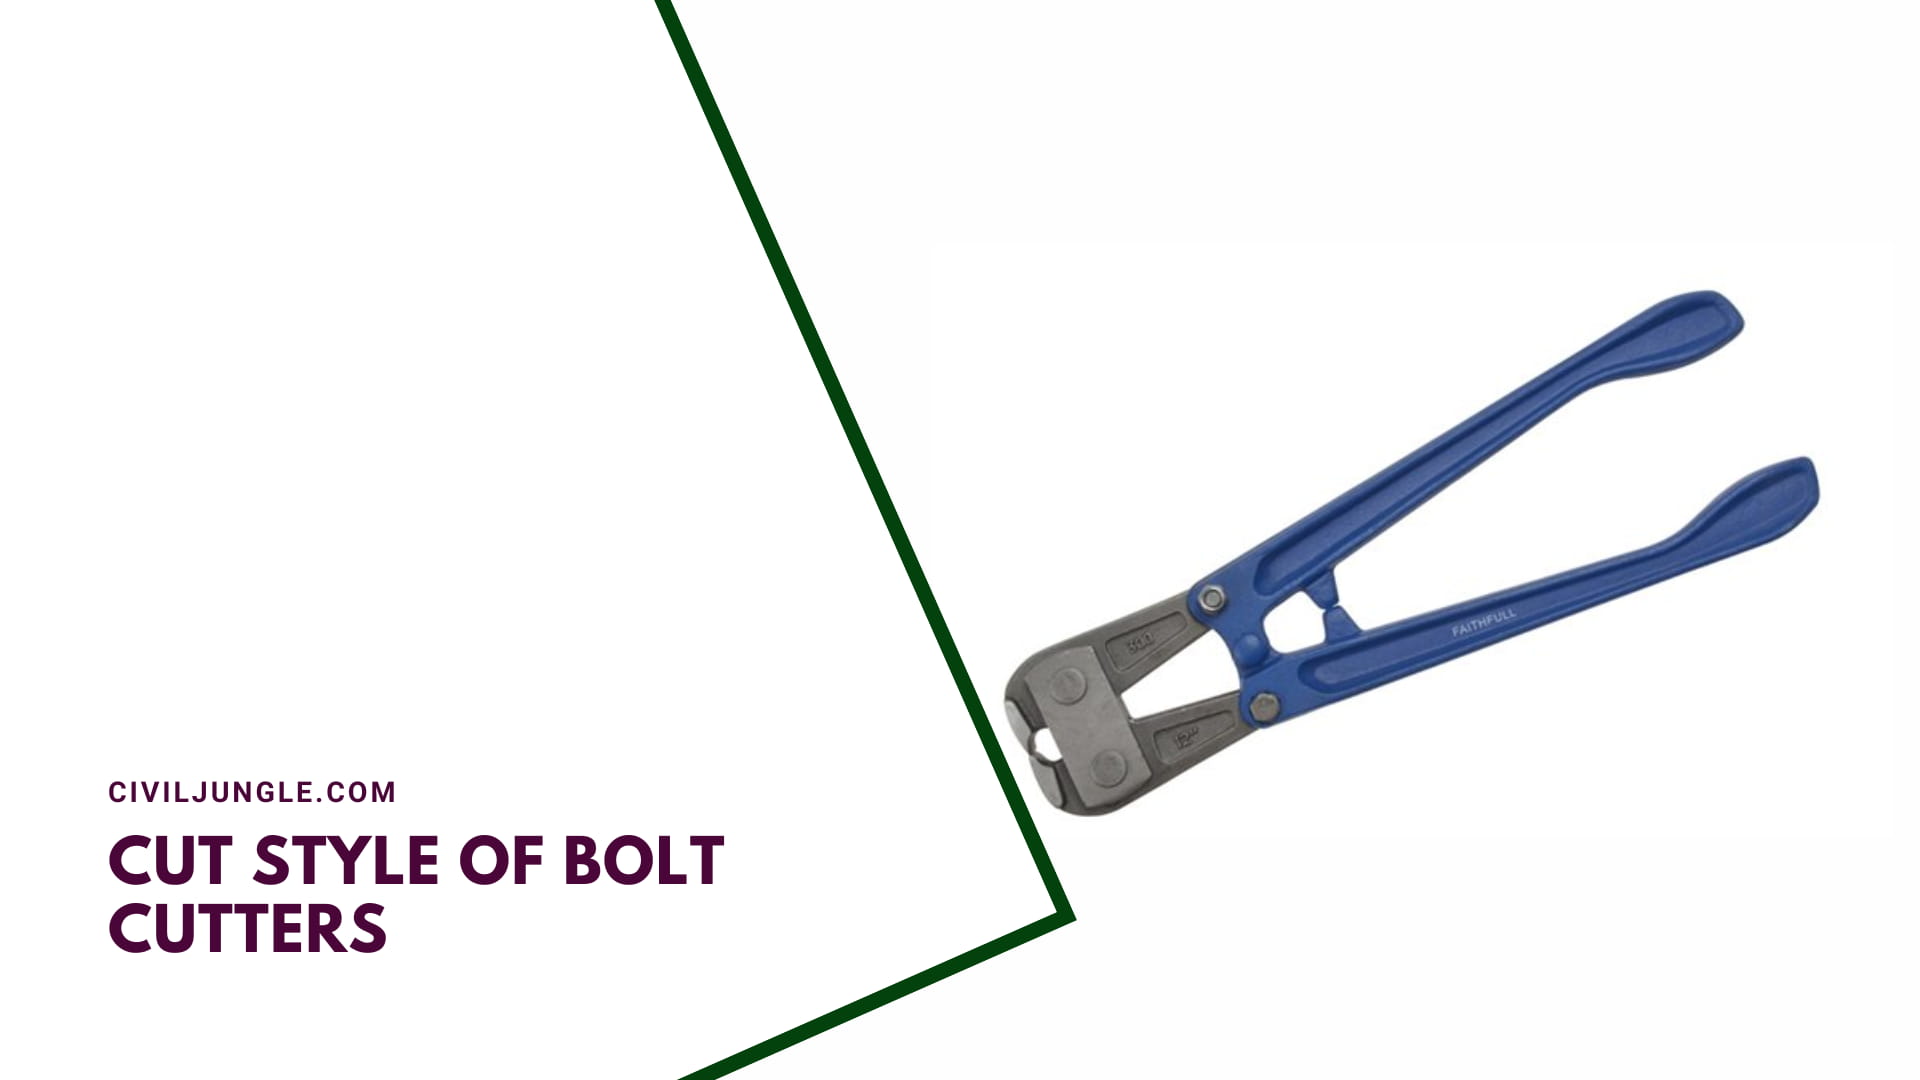 Cut Style of Bolt Cutters